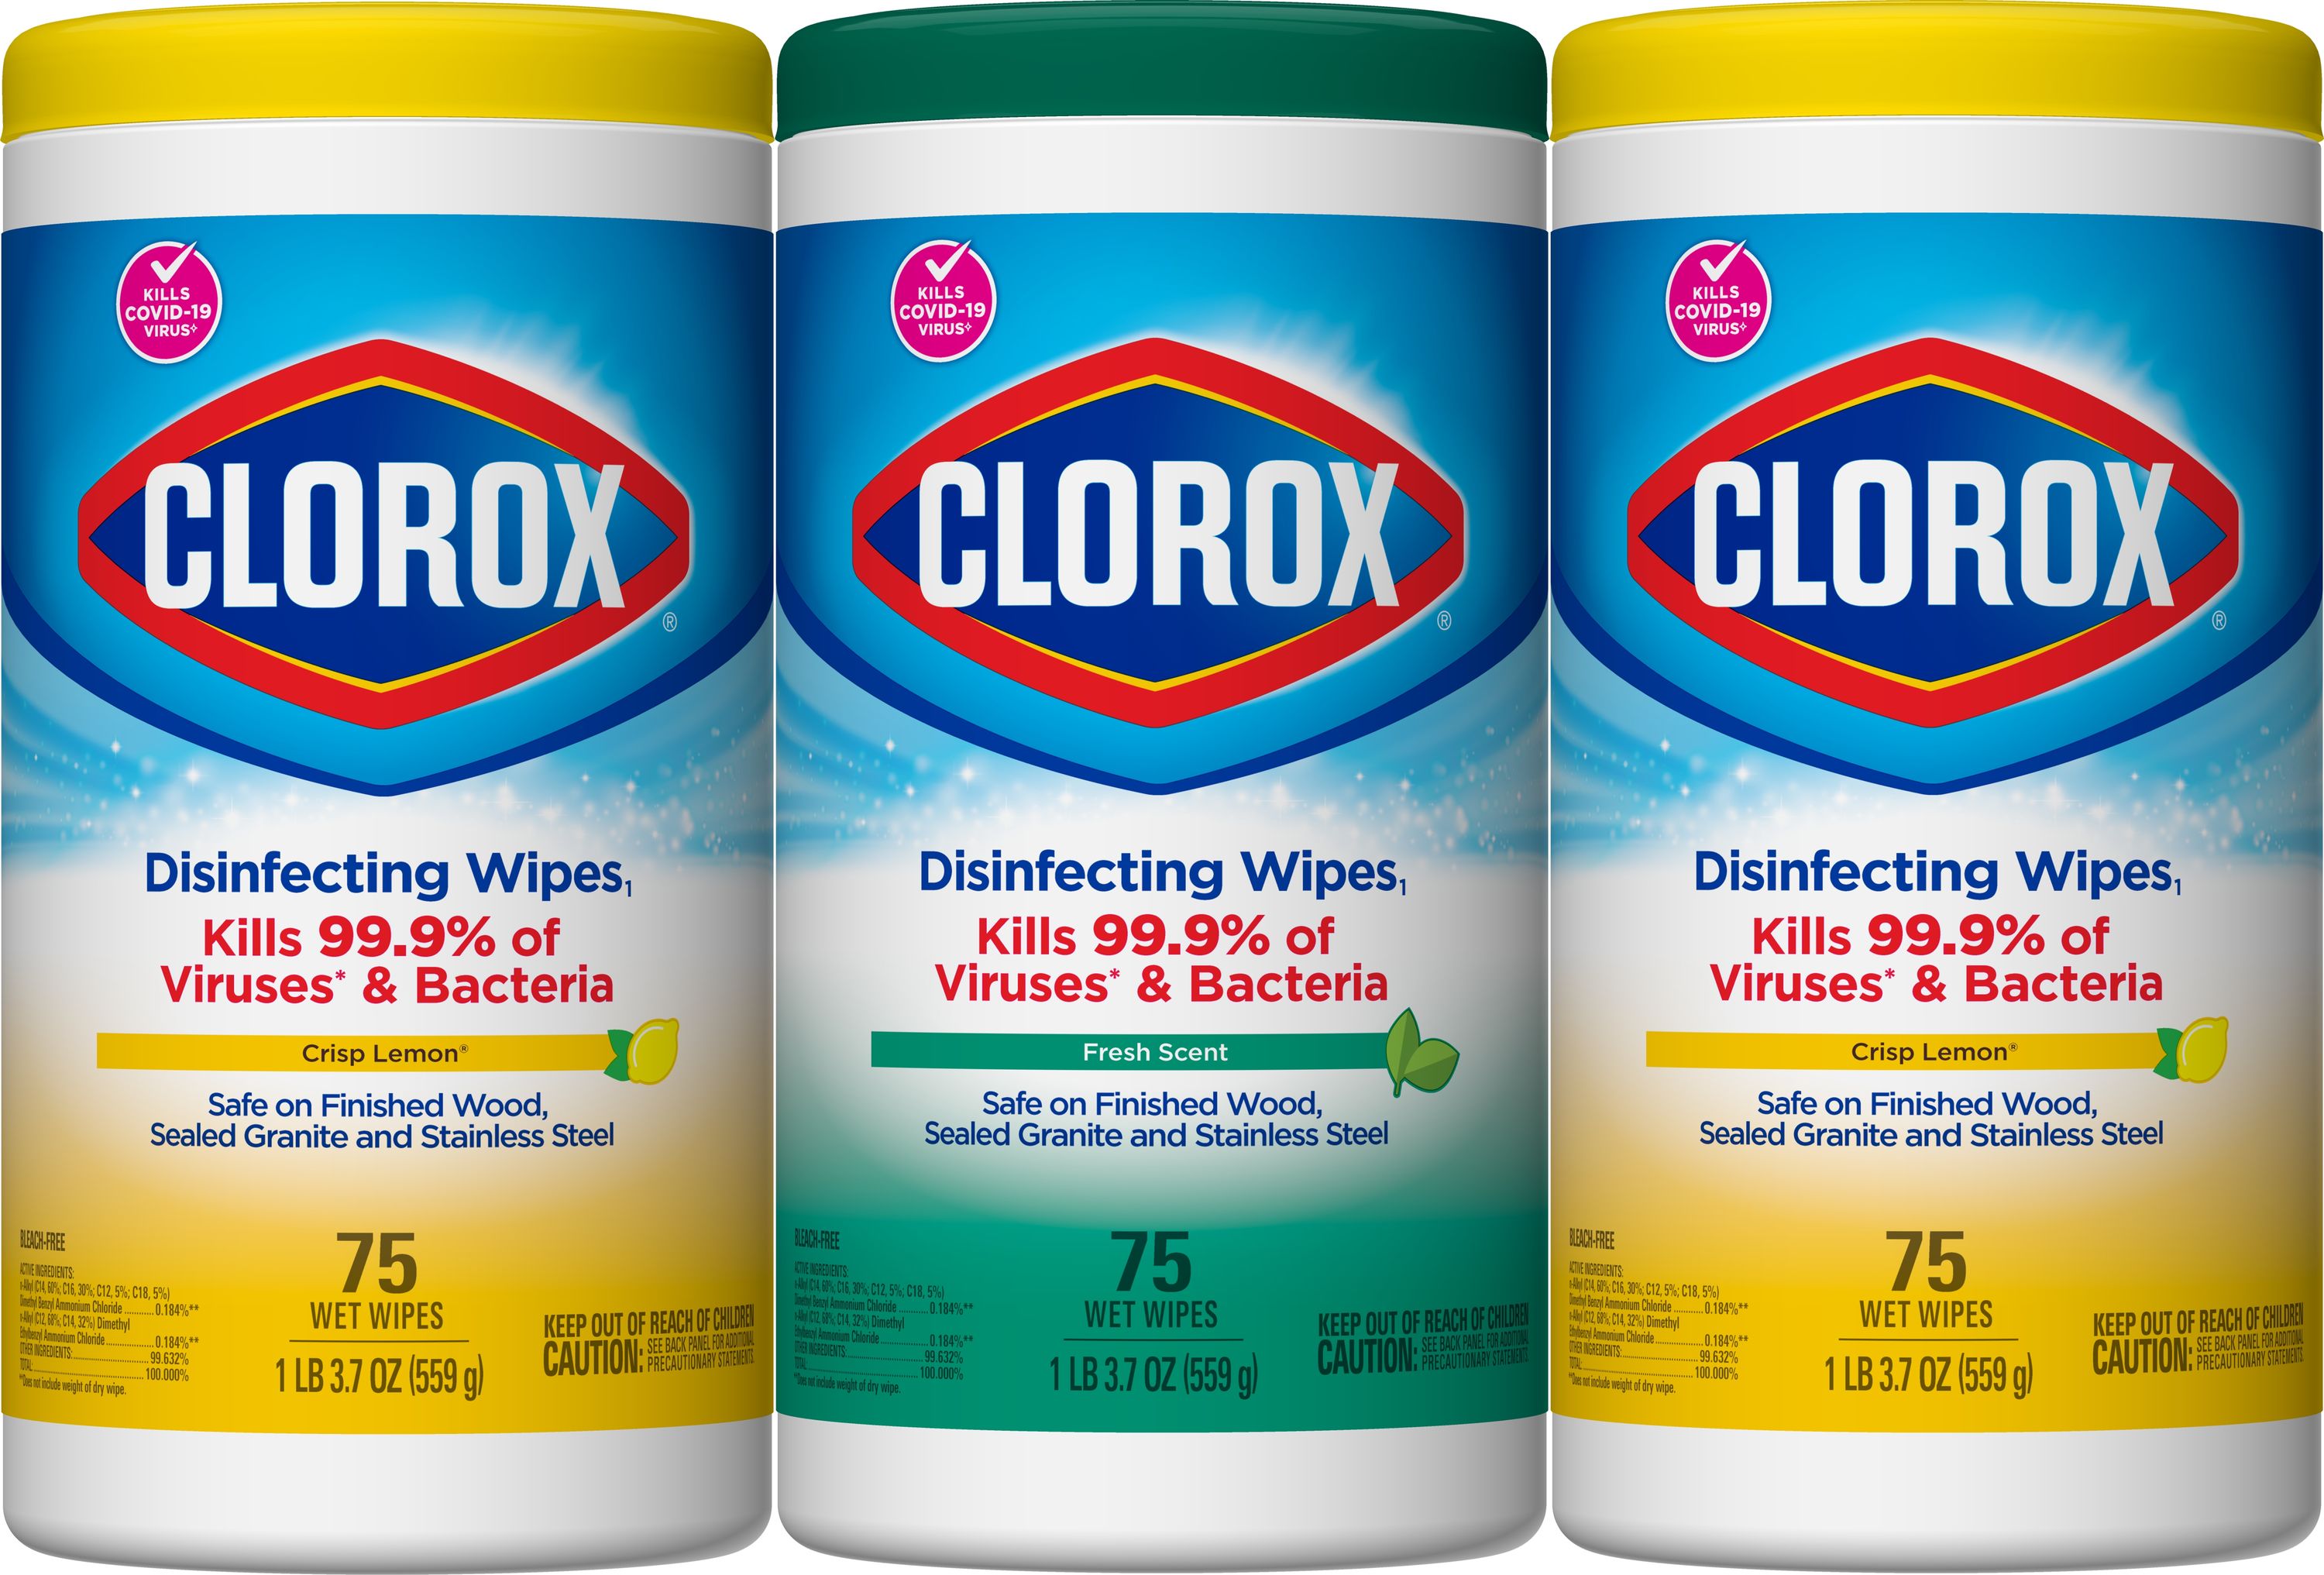 Clorox Disinfecting Wipes 225-Count, Bleach Free Cleaning Wipes (Pack of 3)  & Clorox Disinfecting Wipes to Go, 25 Count, Fresh Scent Bundle